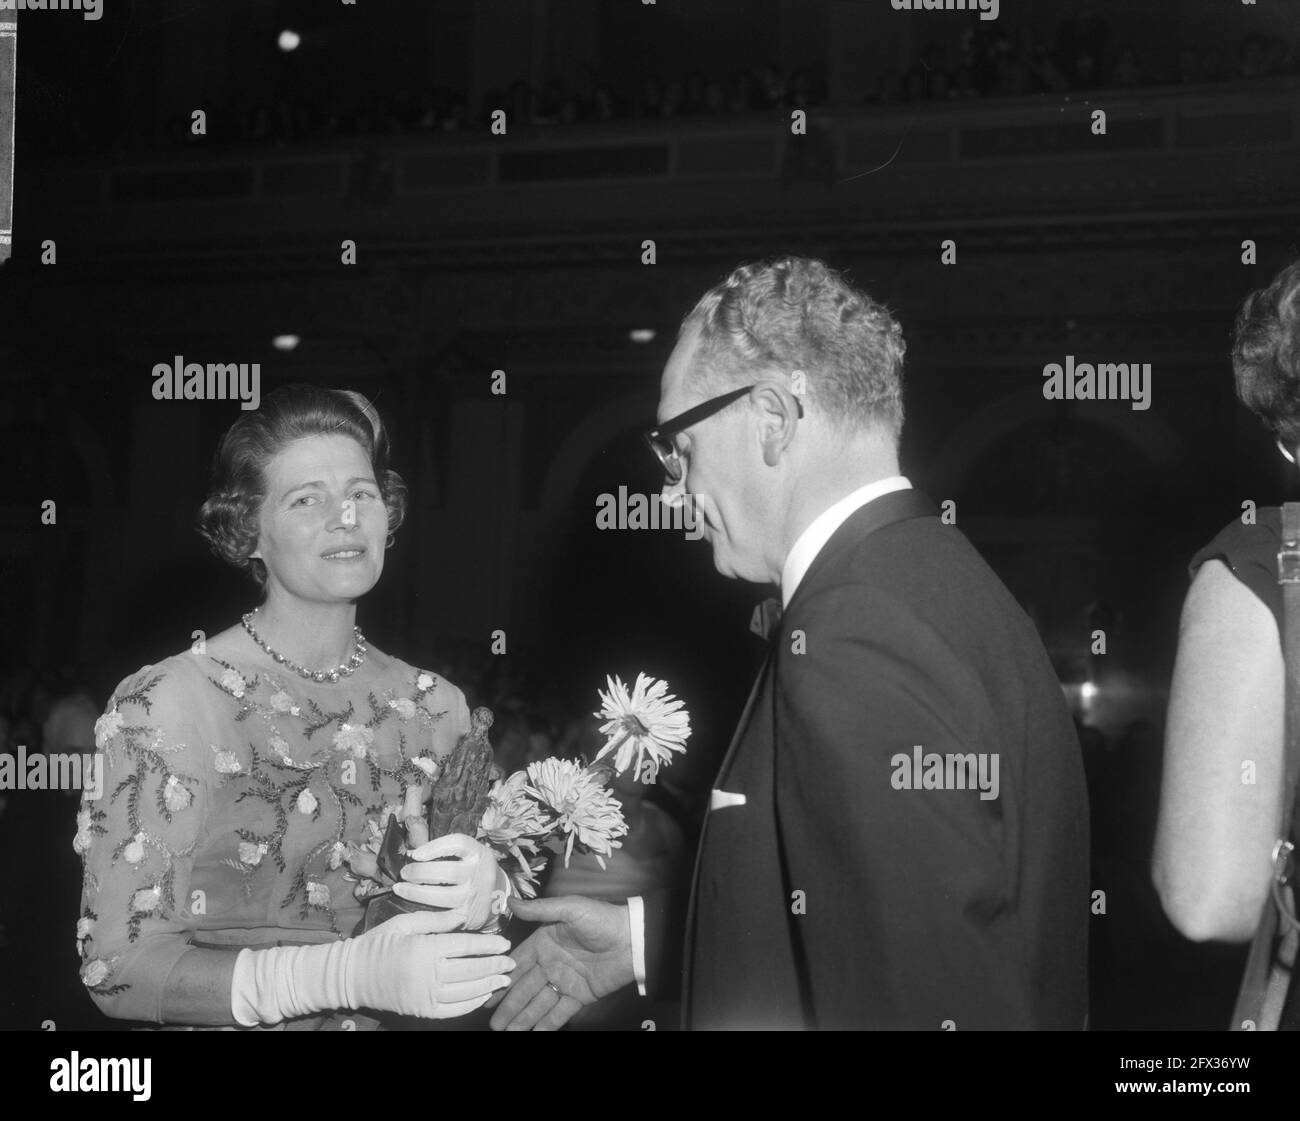 Mrs. Mary Soames while receiving an Edison from Minister Vrolijk, October 29, 1965, cultural awards, classical music, ministers, musicians, award ceremonies, The Netherlands, 20th century press agency photo, news to remember, documentary, historic photography 1945-1990, visual stories, human history of the Twentieth Century, capturing moments in time Stock Photo